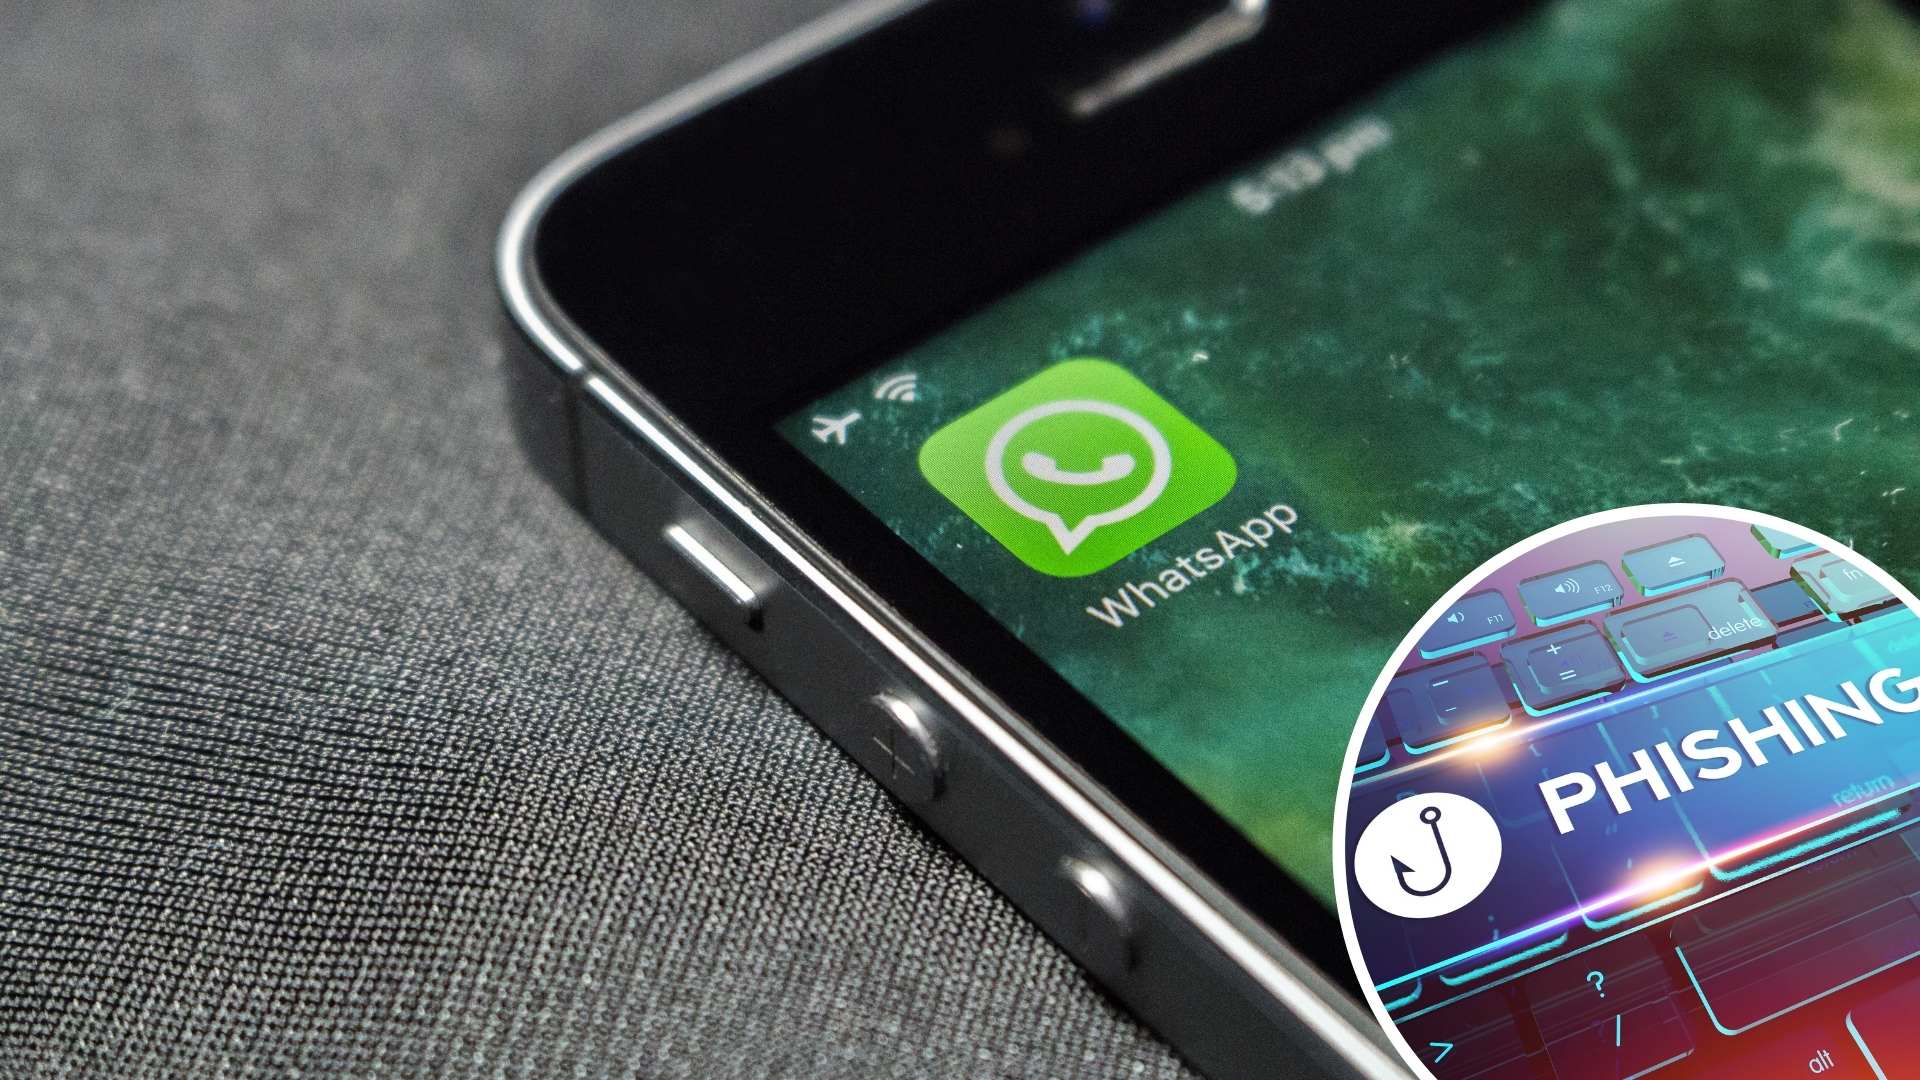 Newry police issue WhatsApp 'phishing message' warning | Newry Times - newry news facebook